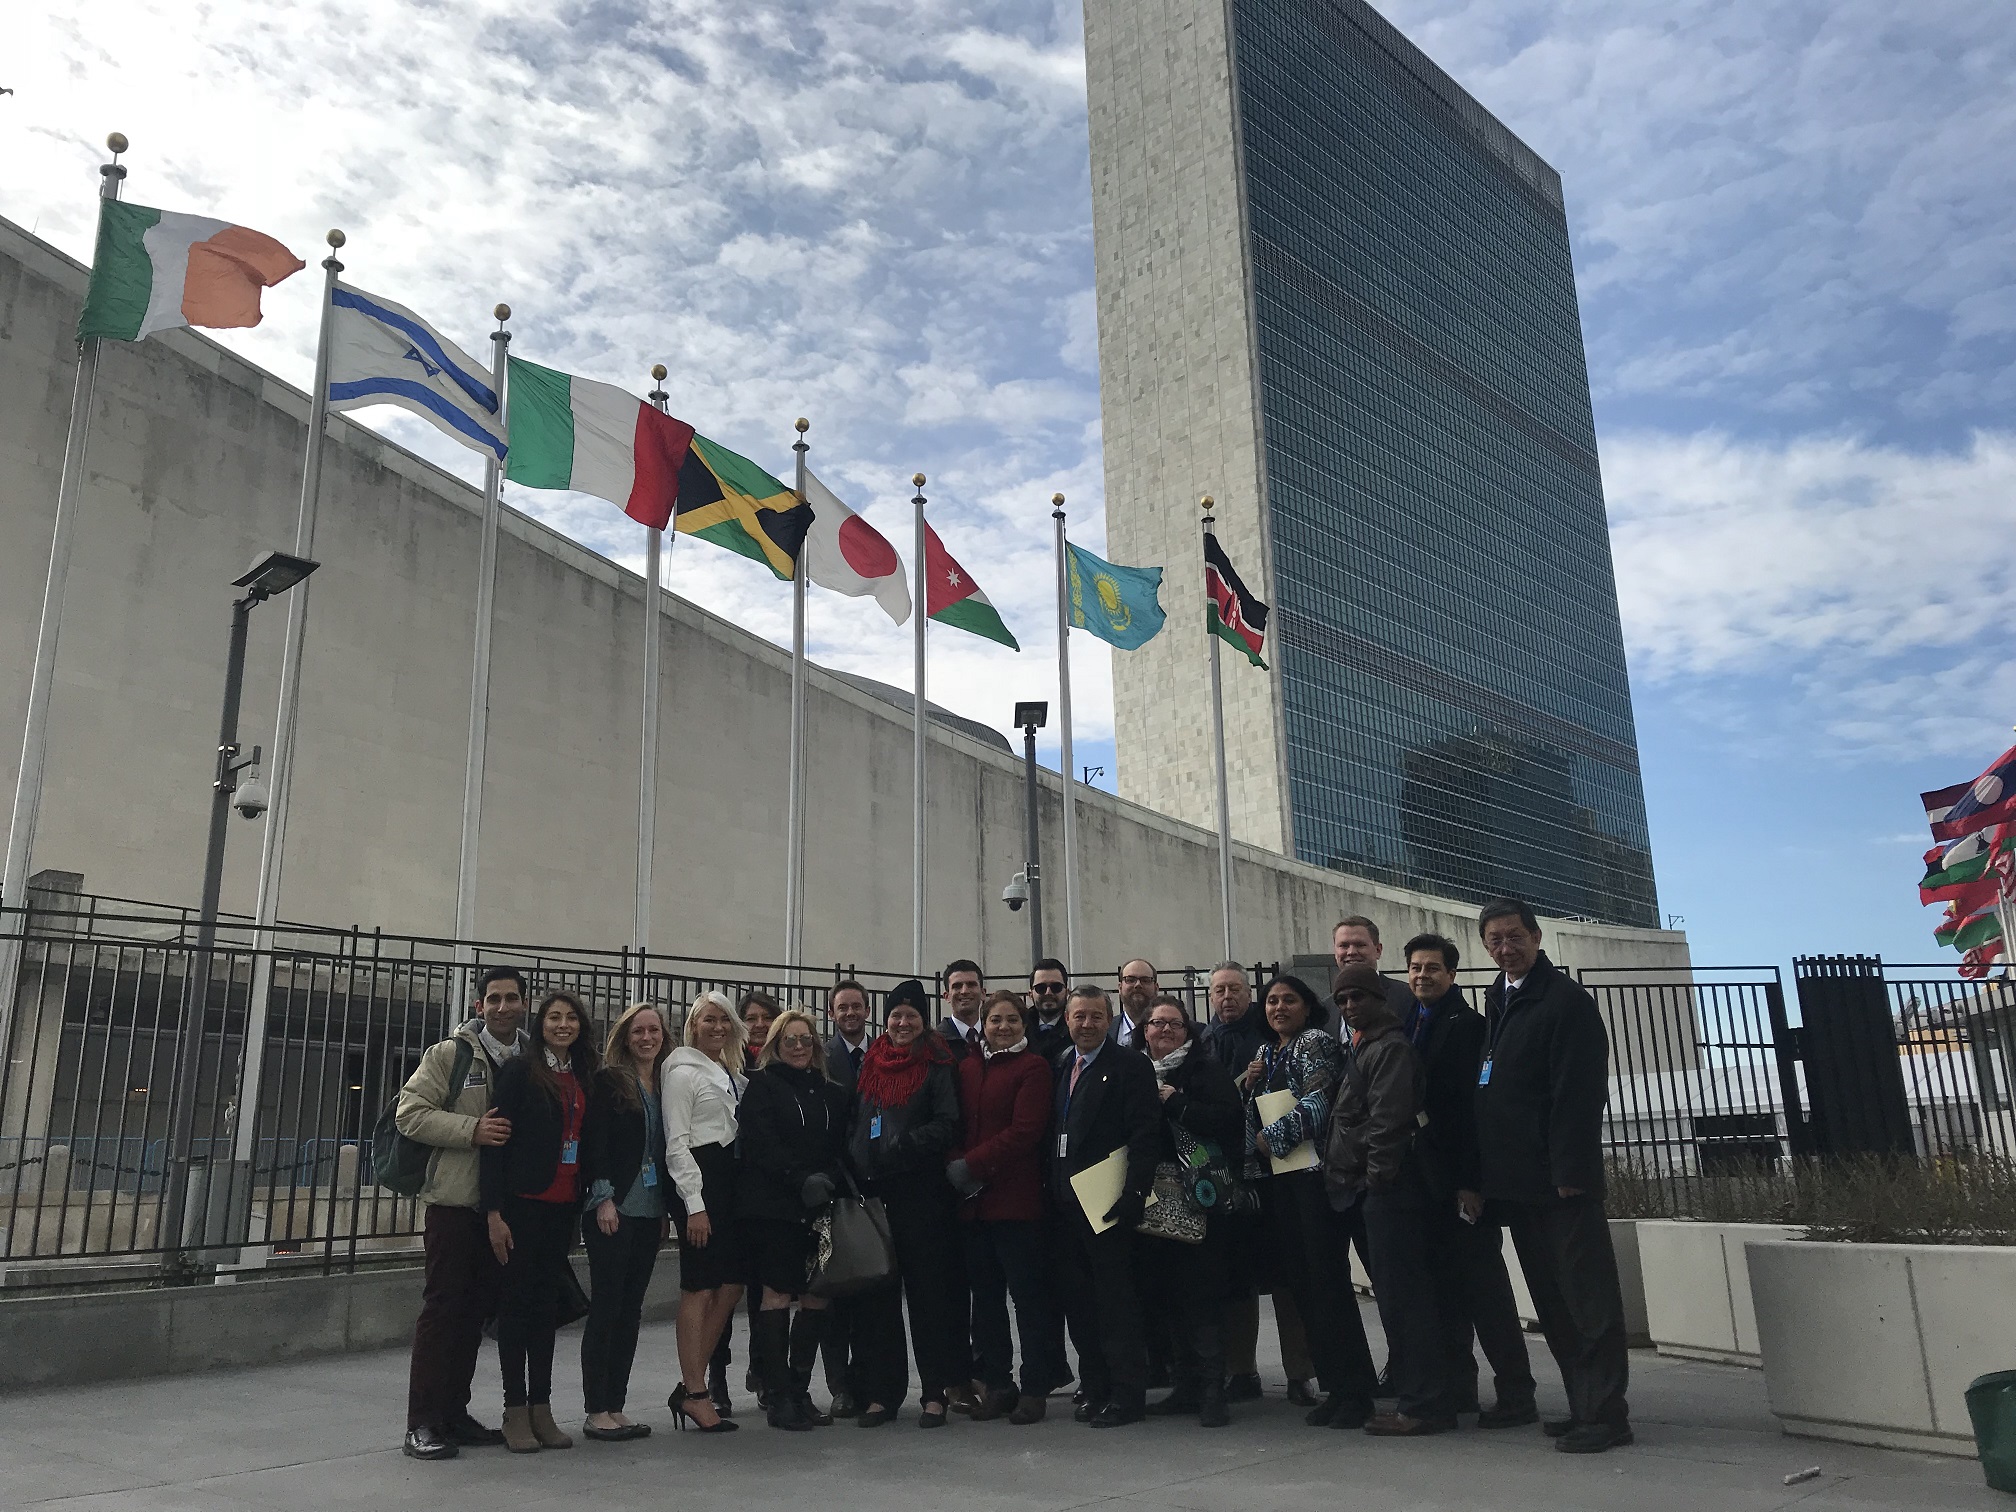 UVU at CSW62